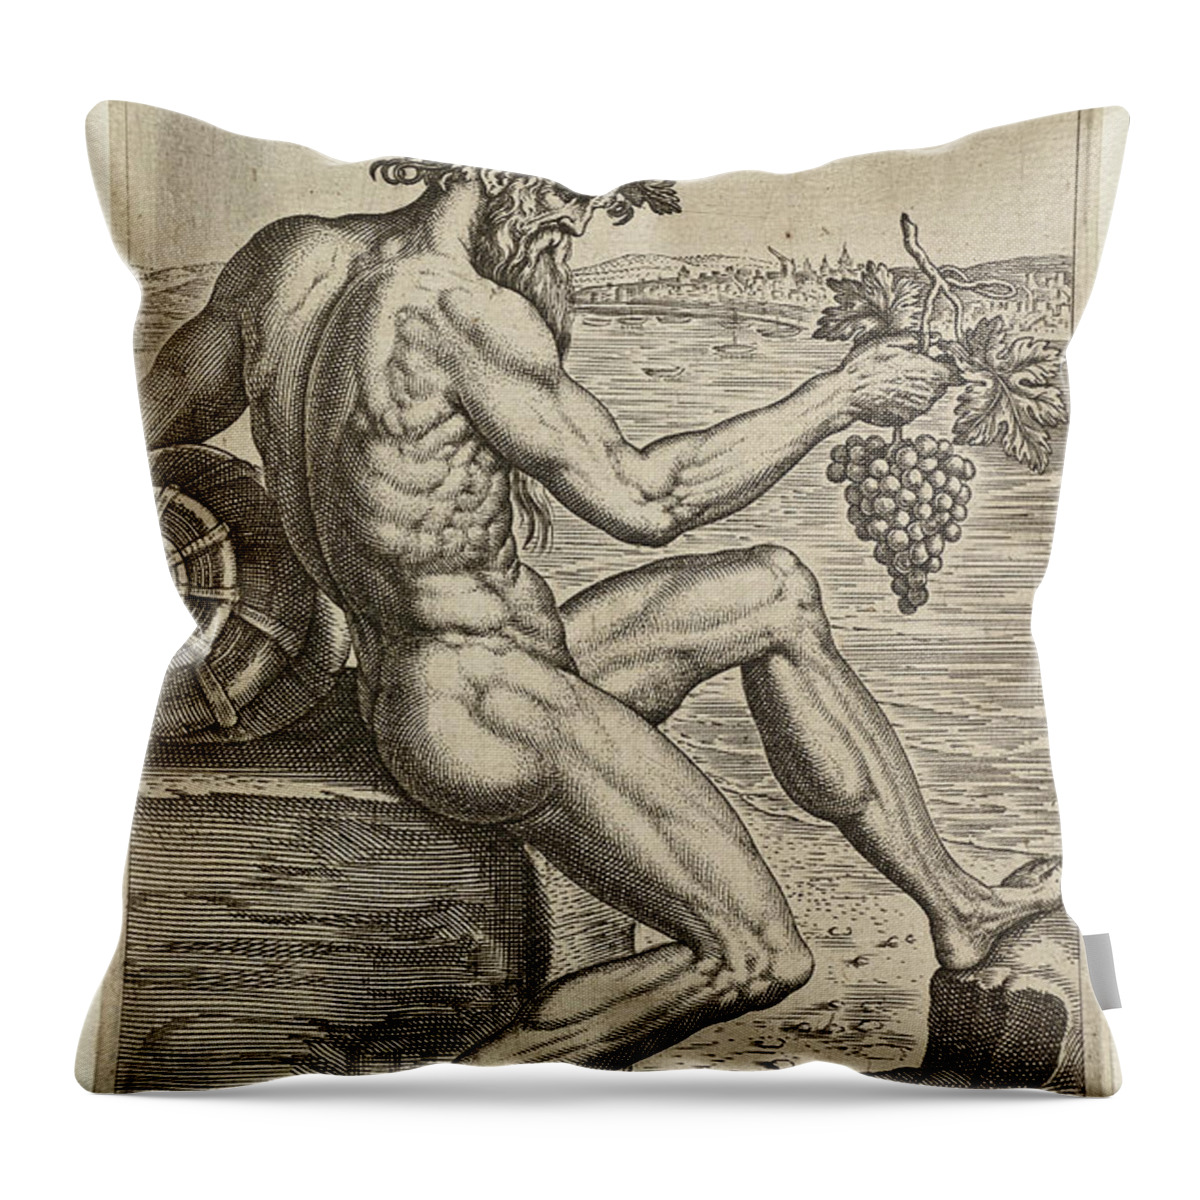 Philip Galle Throw Pillow featuring the drawing The river god Rhenus of the Rhine, seated on a stone. A bunch of grapes in his hand by Philip Galle